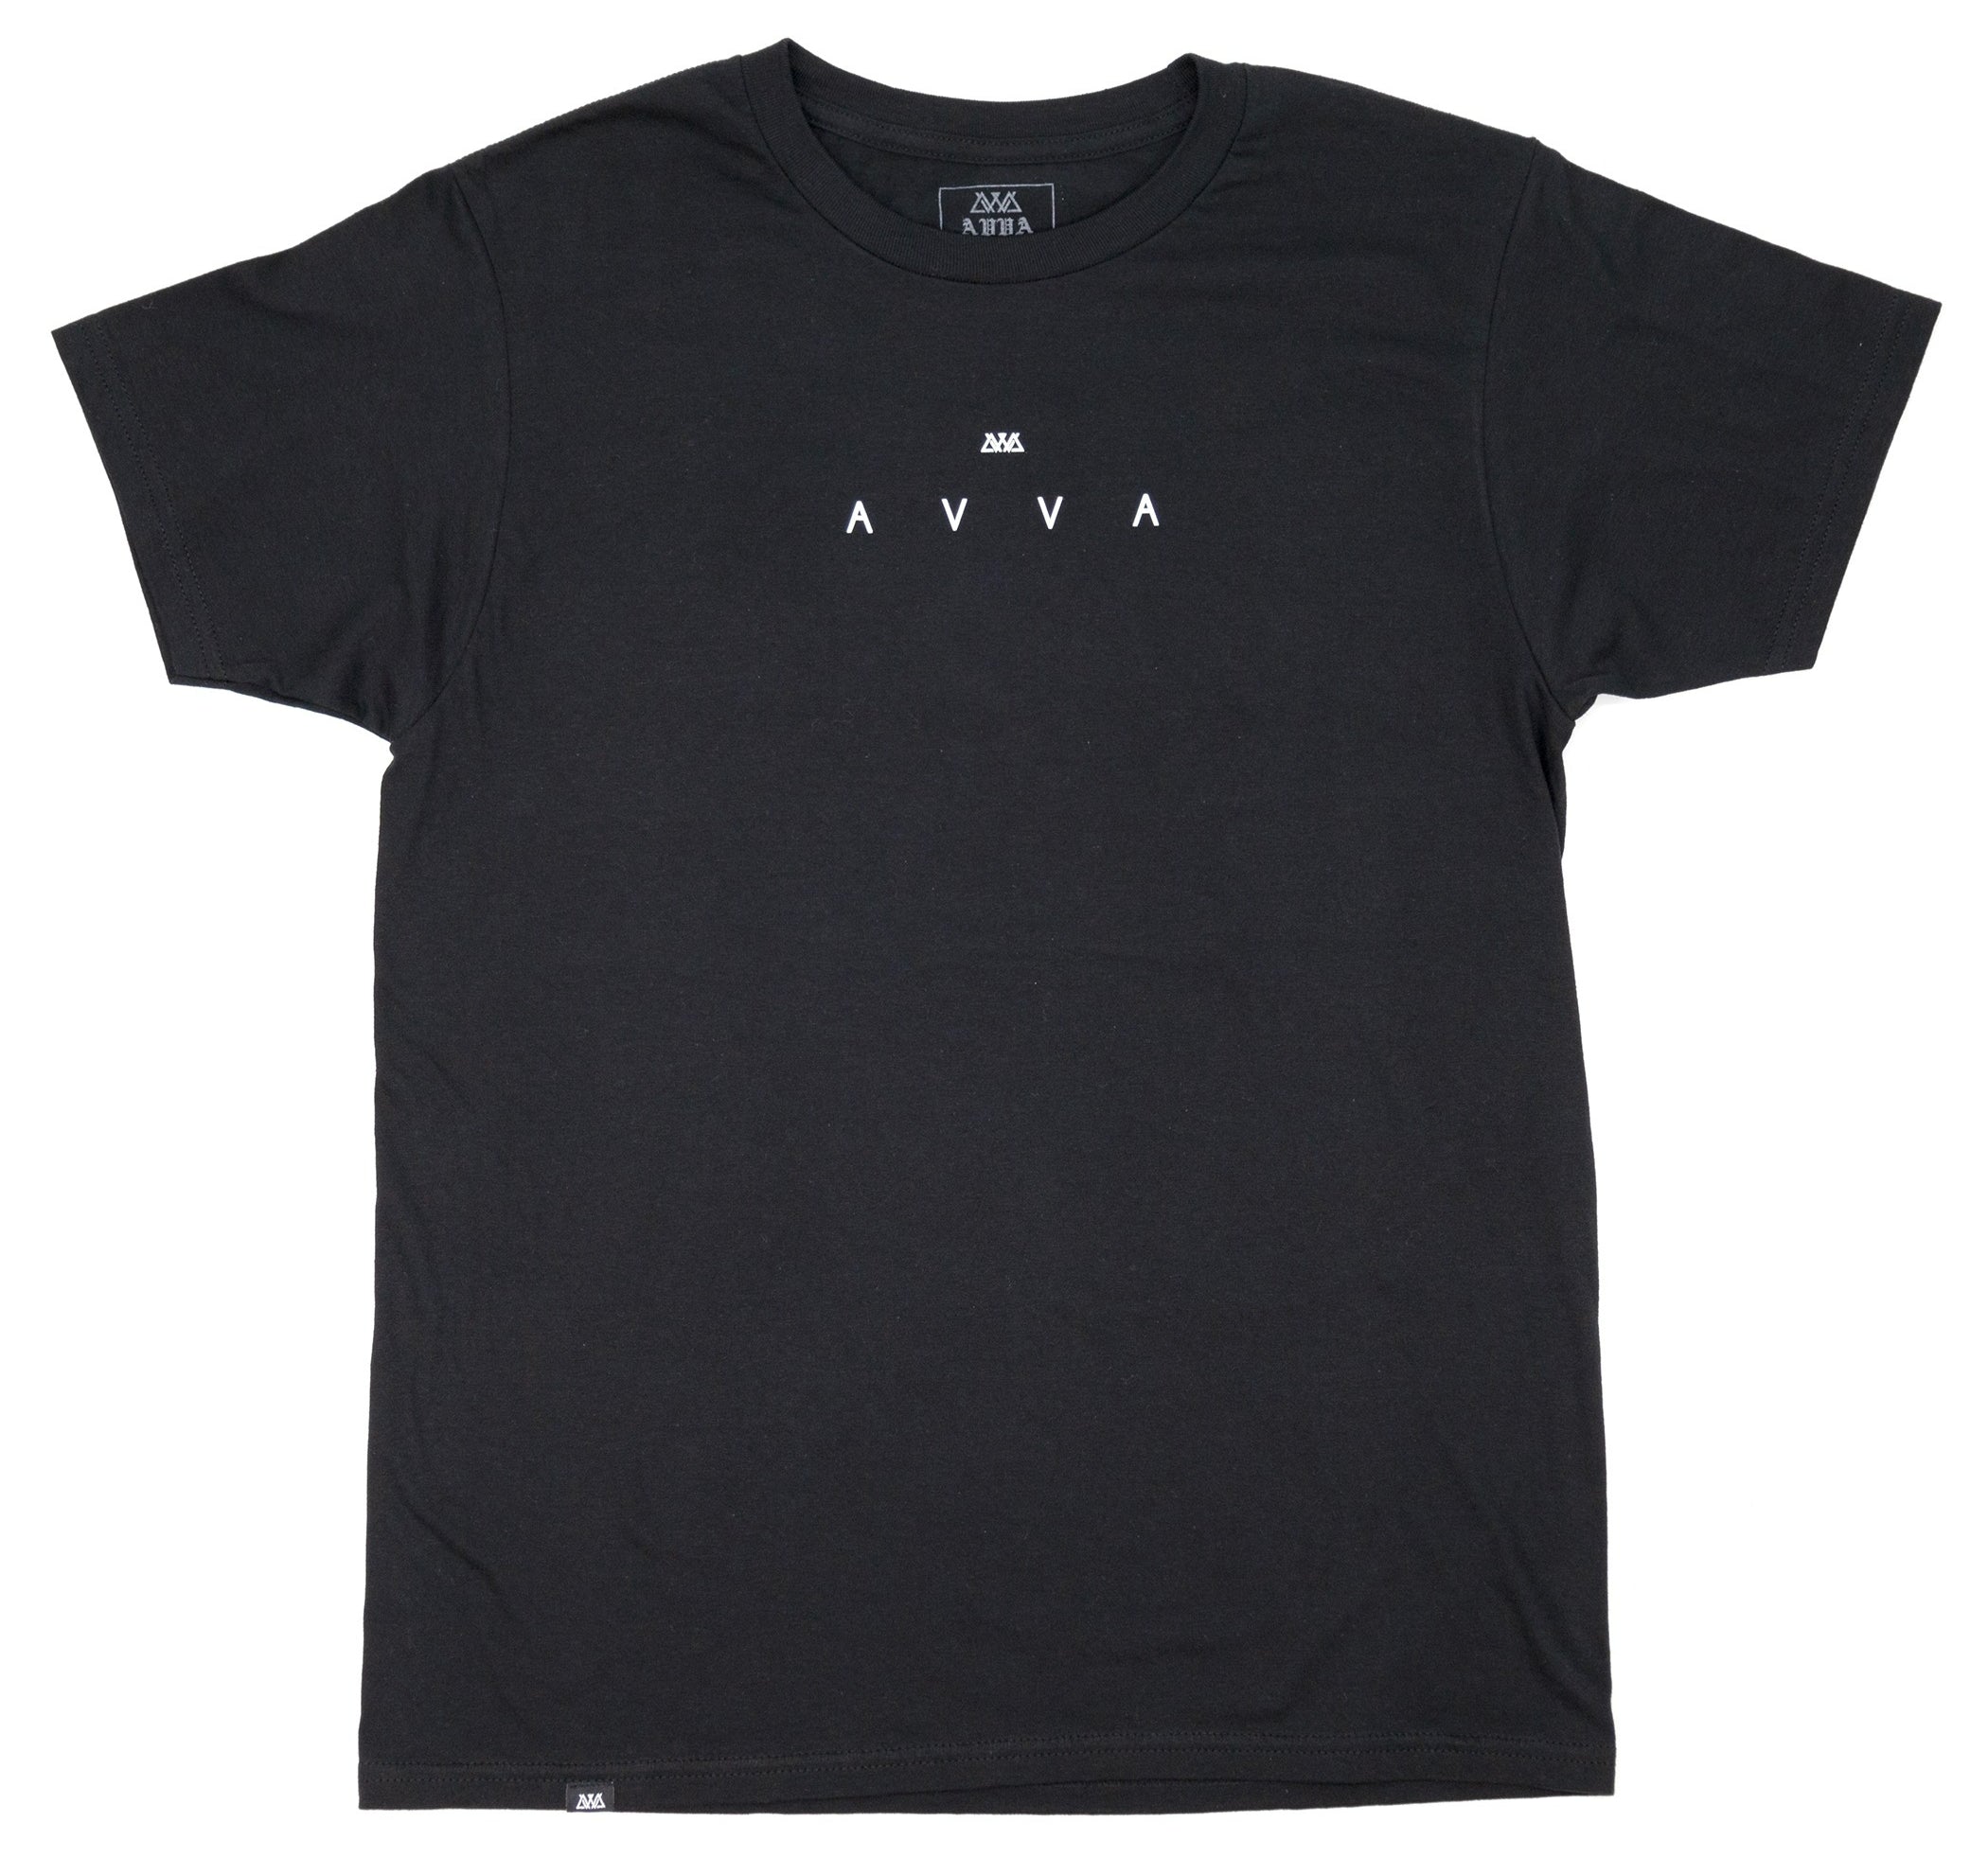 FRONT VIEW OF ELEMENTS TEE. BLACK TEE WITH AVVA LOGO IN THE MIDDLE CHEST AREA.